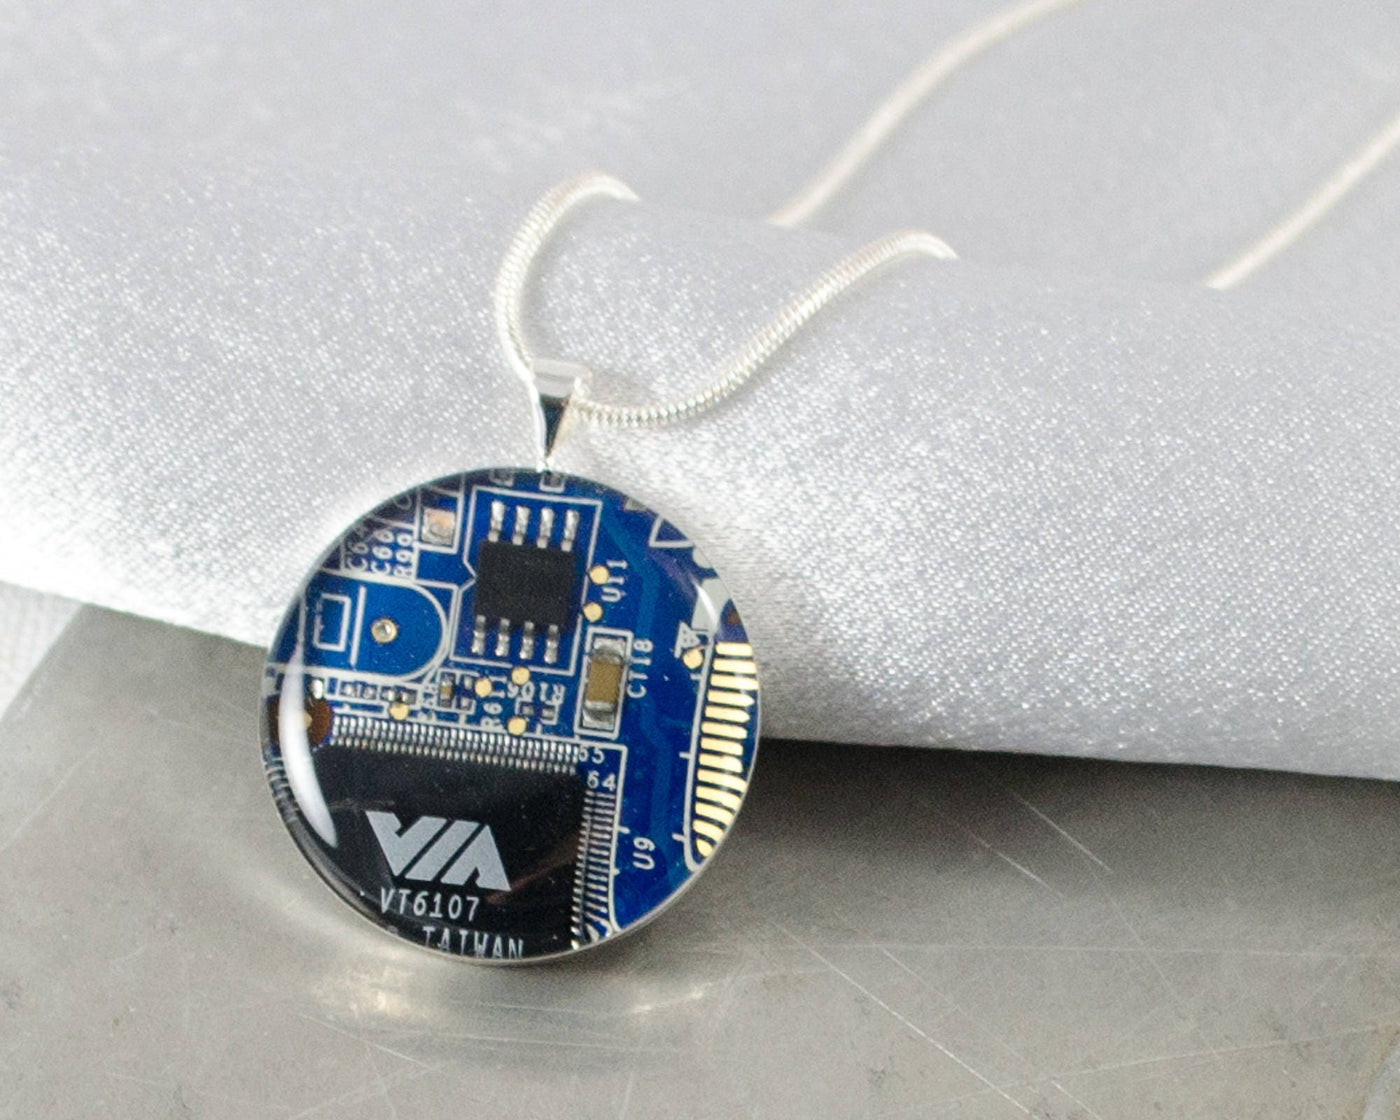 Circuit Board Necklace Blue, Upcycled Jewelry, Motherboard Necklace, Geeky Gift for Her, Circuit Board Jewelry, Engineer Gifts, Geekery